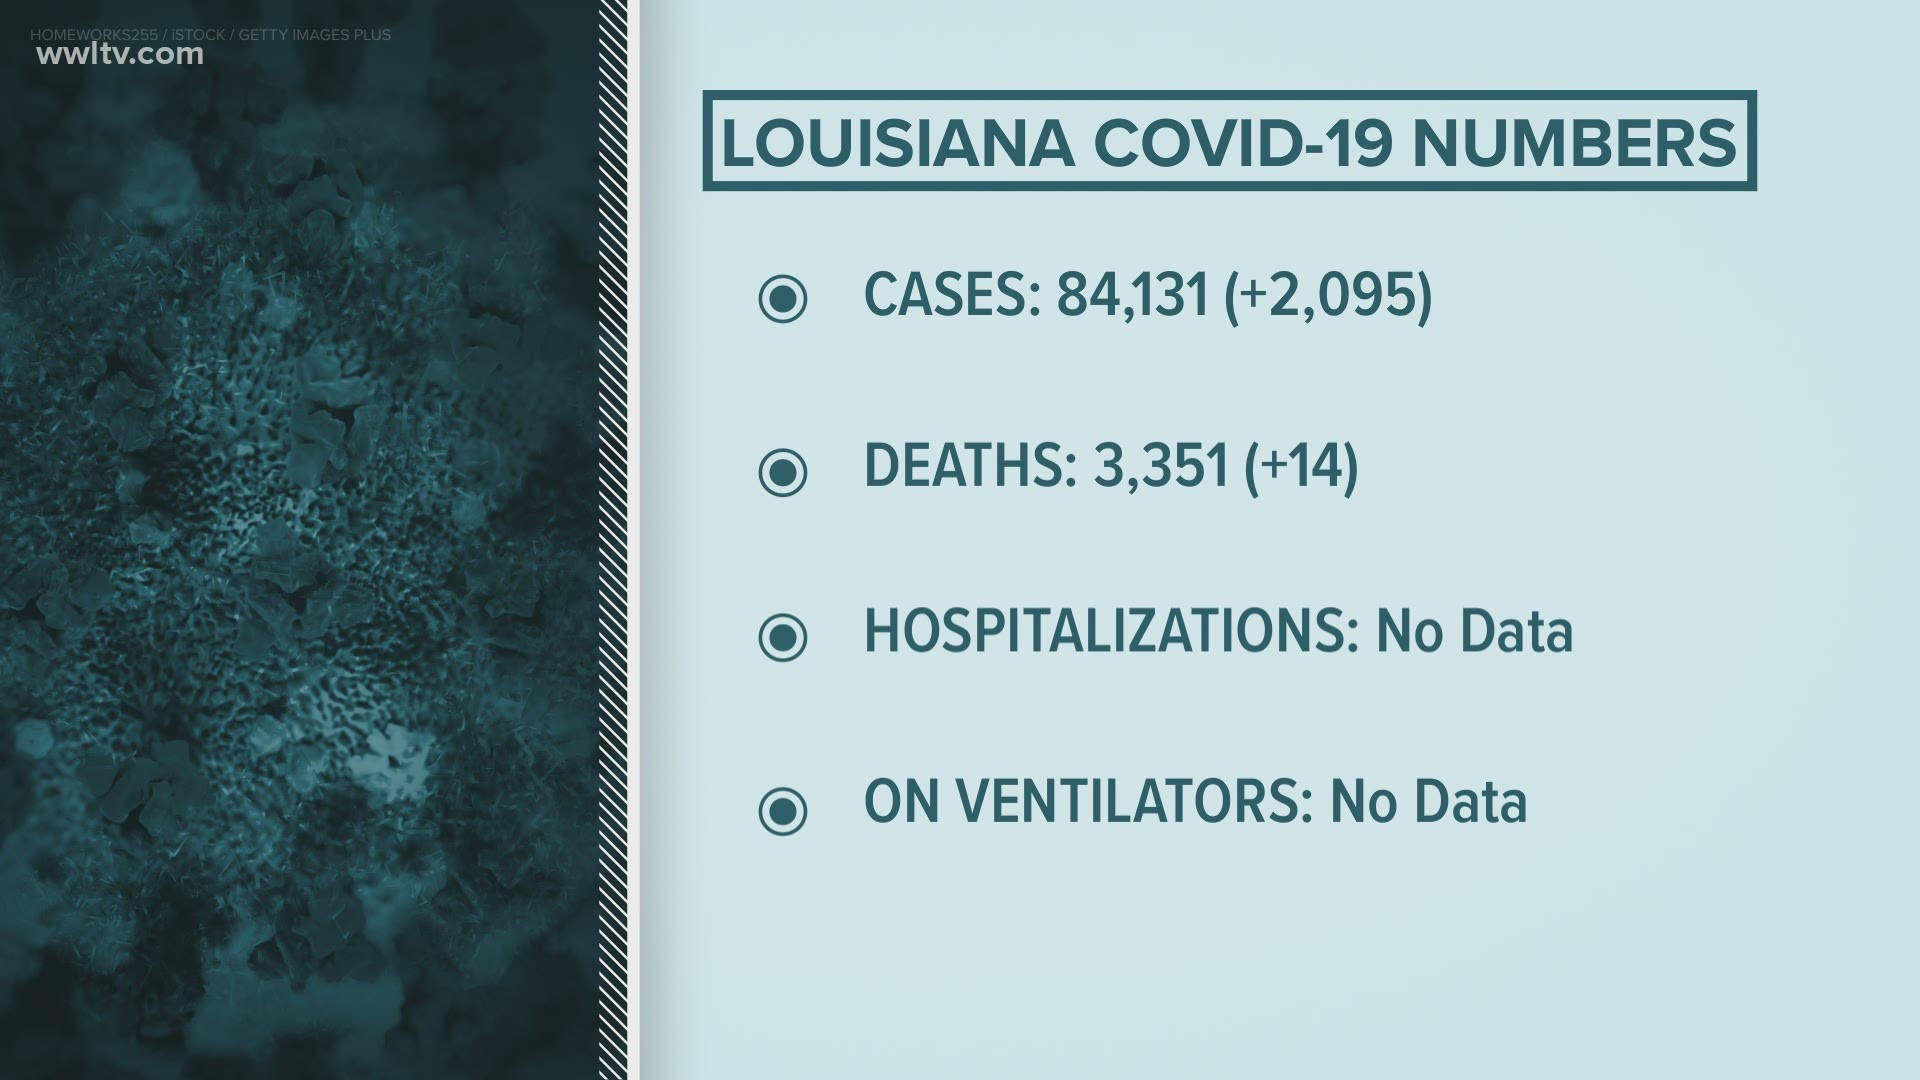 State health officials said the numbers of patients hospitalized and patients on ventilators would be delayed Wednesday. Those stats have been increasing.